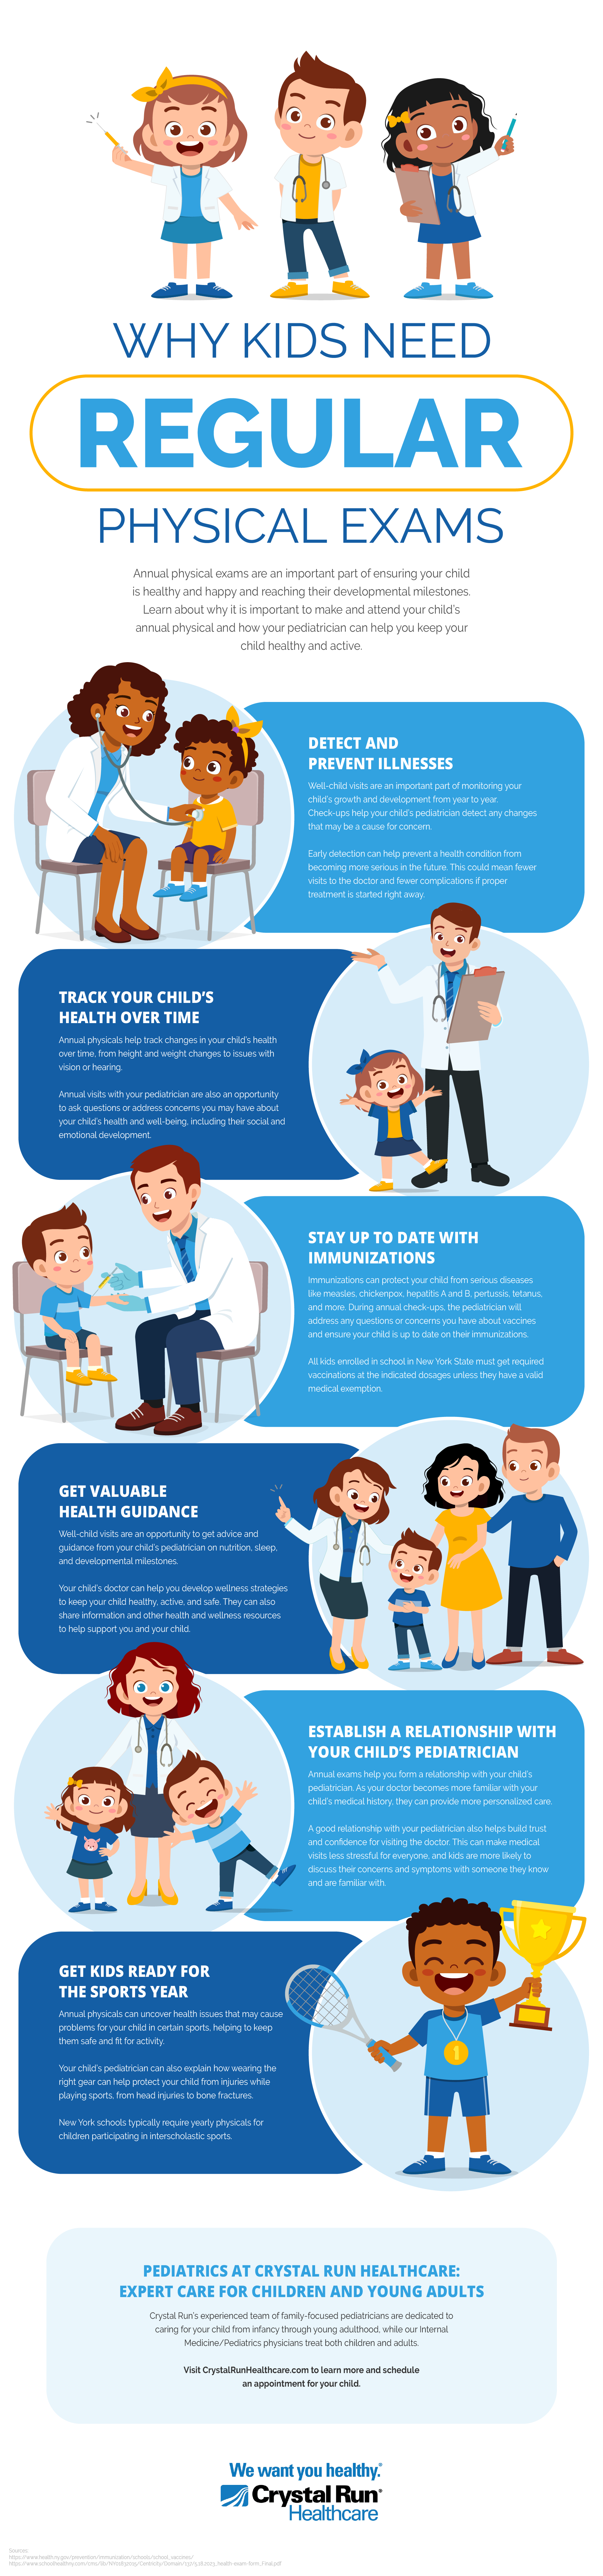 Why Kids Need a Regular Exam Infographic